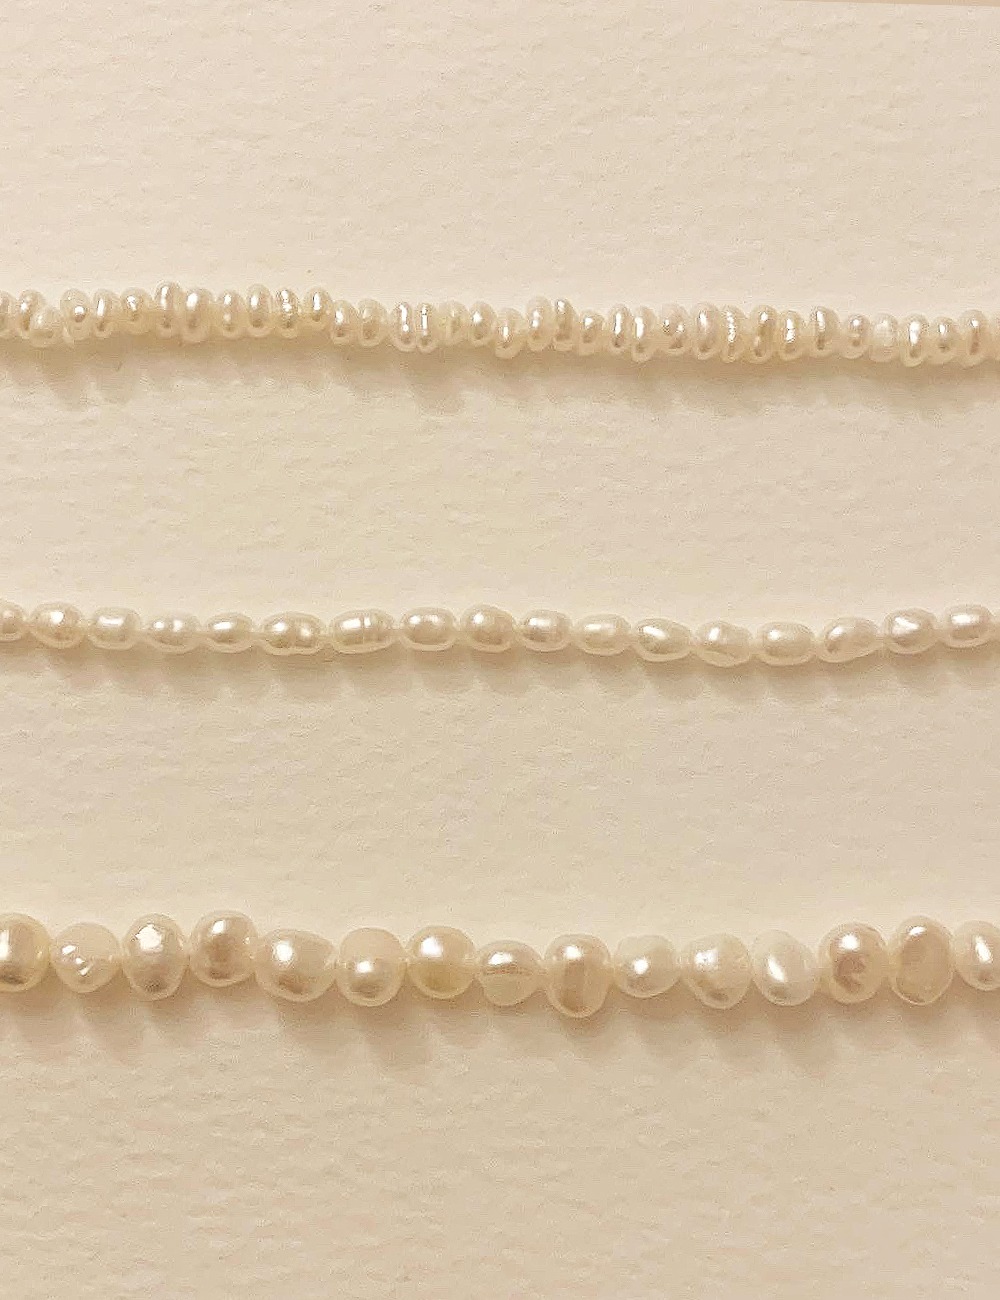 (silver 92.5) Pearl choker necklace